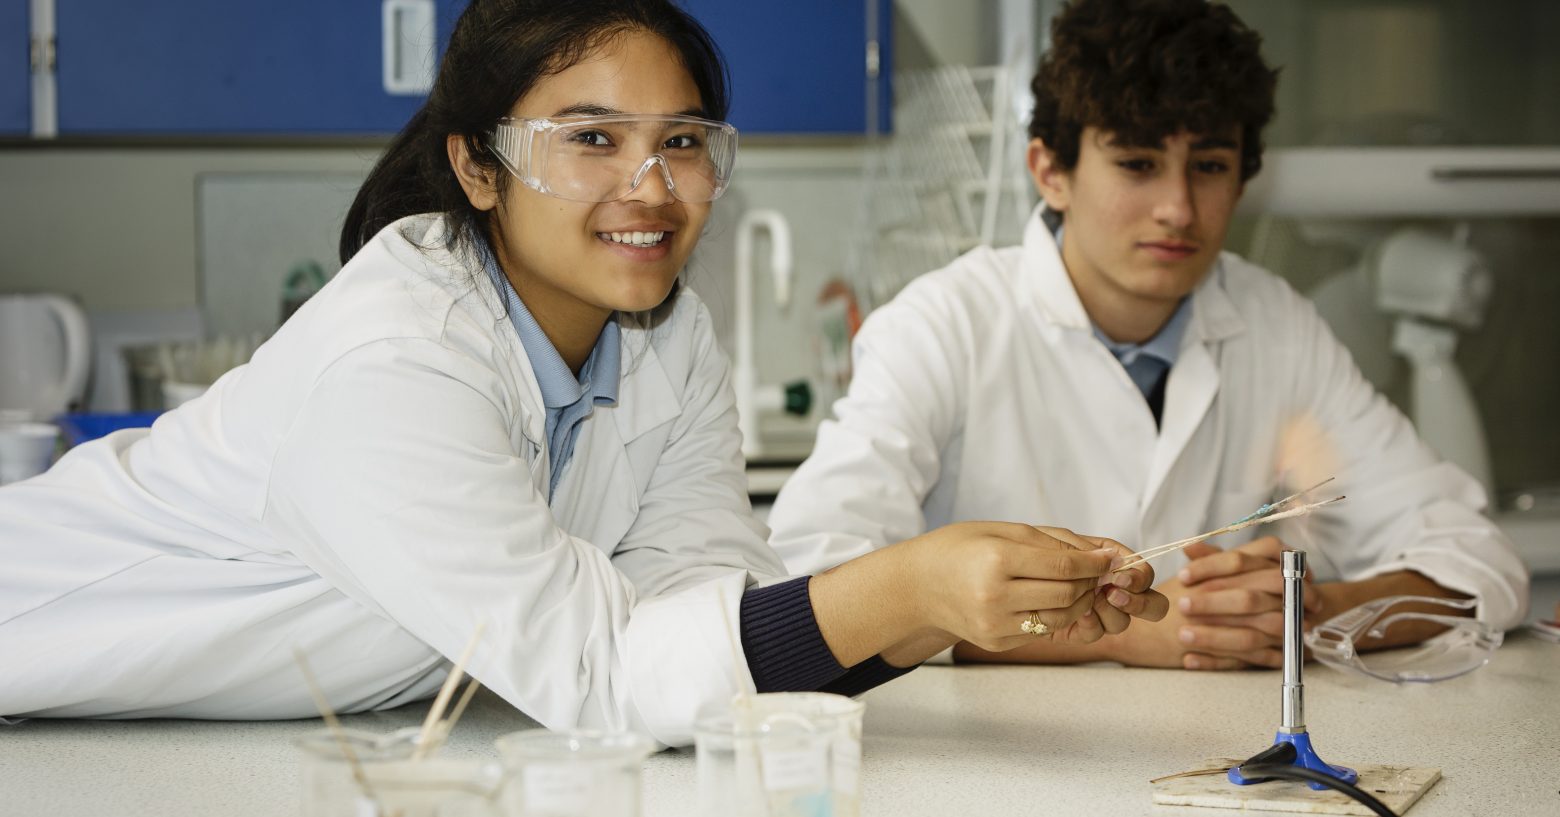 Students in the science lab